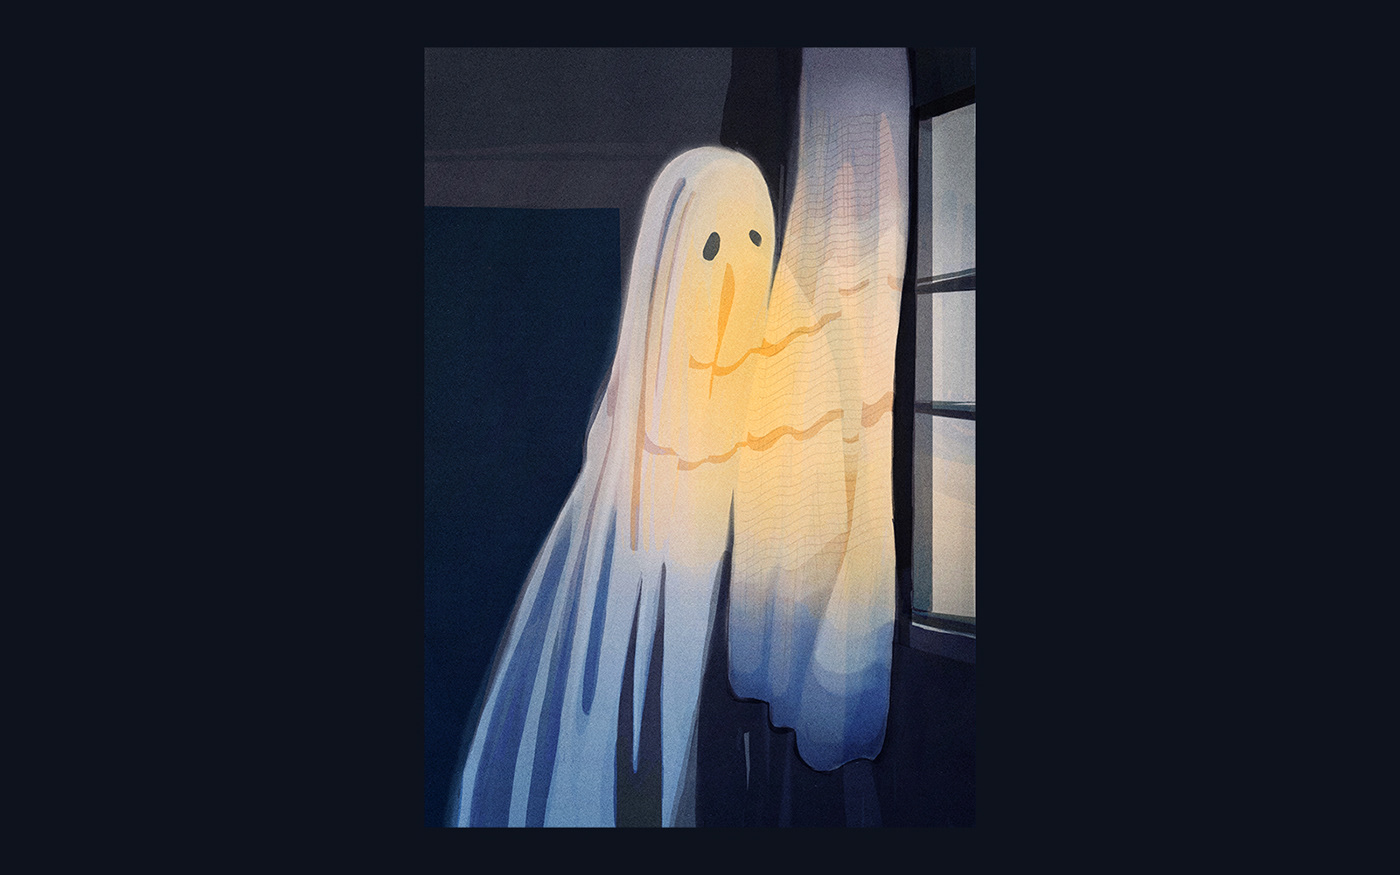 a ghost story editorial Editorial Illustration film illustration ghost haunted magazine Magazine illustration prologue magazine